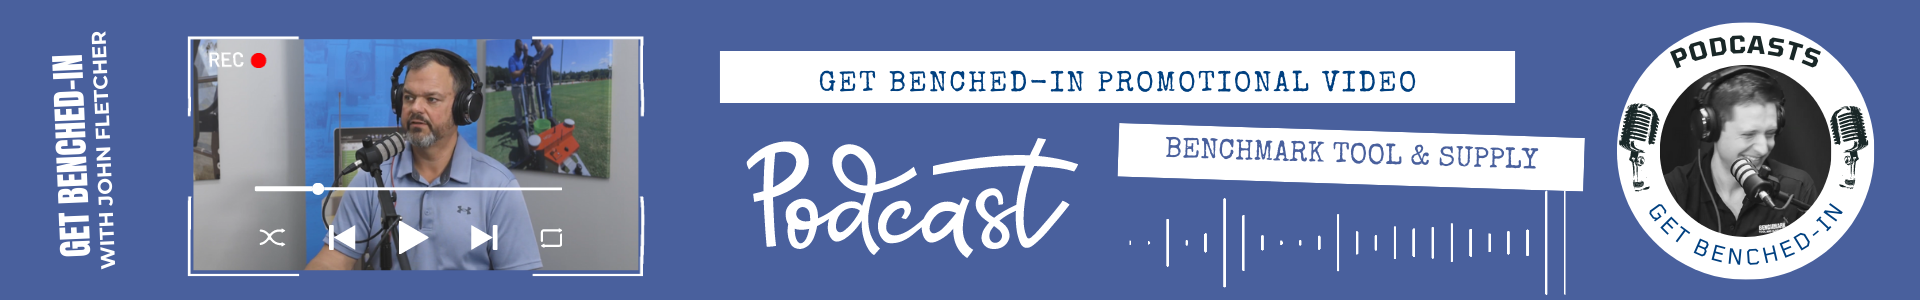 Get Benched-In Promotional Video